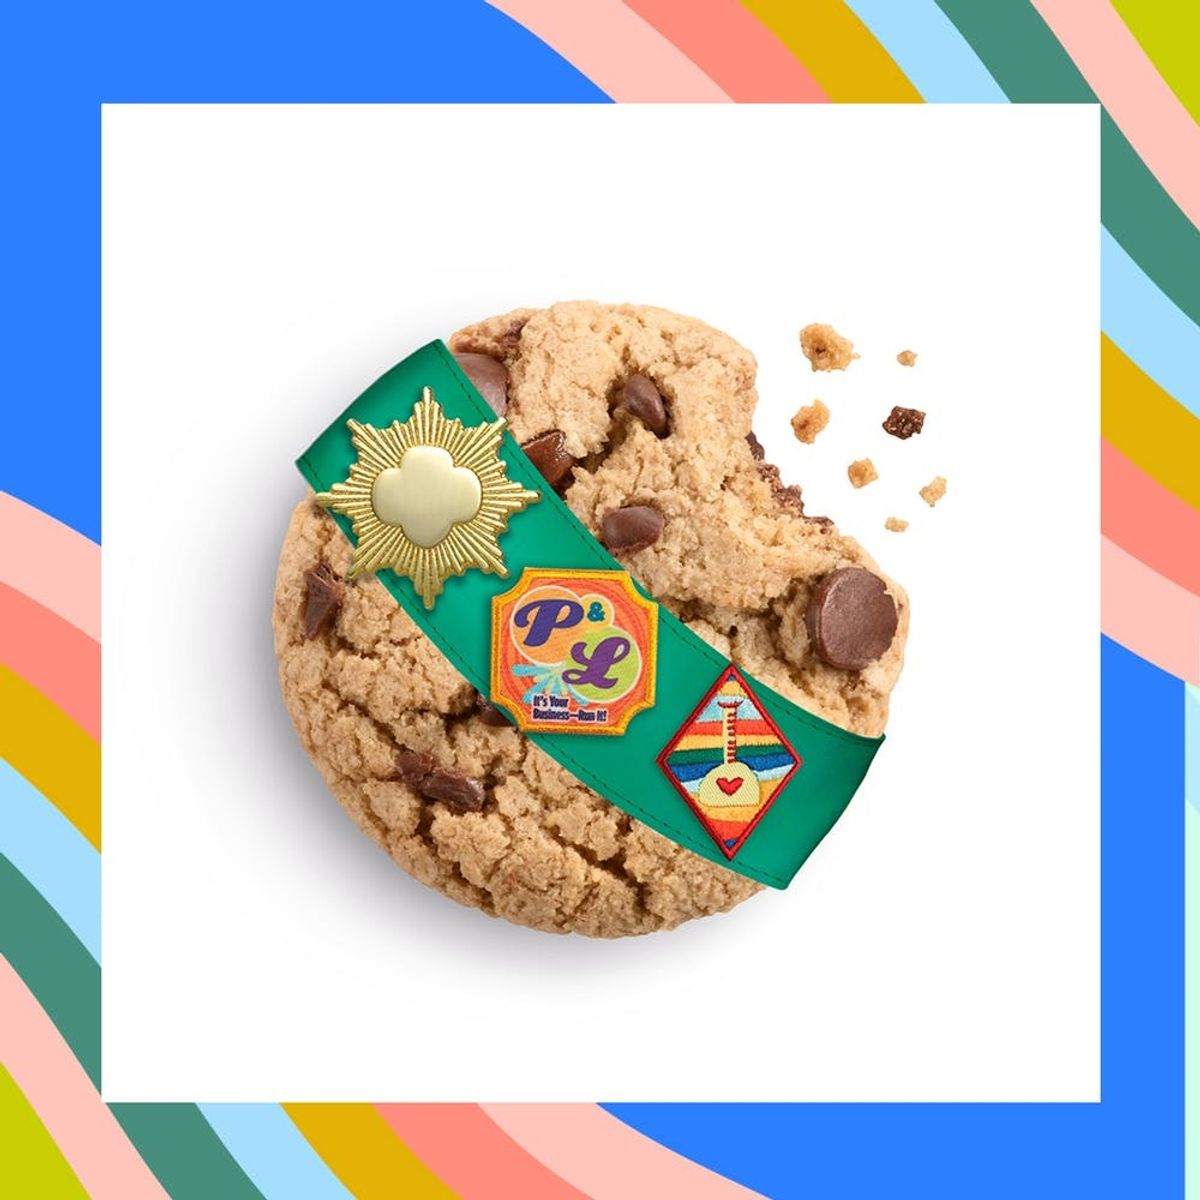 We’re Already Losing It Over 2019’s New Girl Scout Cookie Flavor